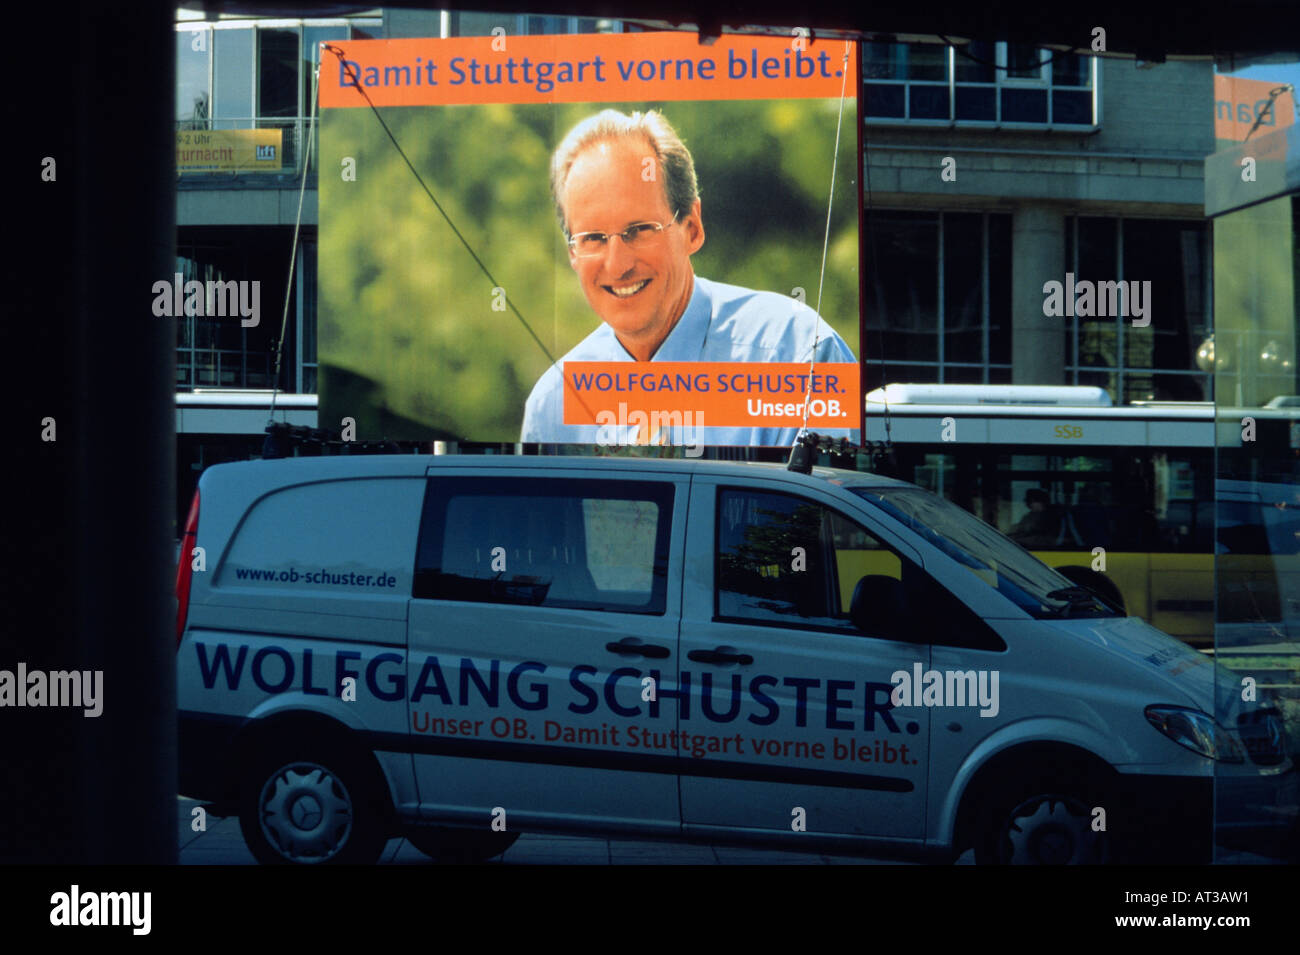 A billboard on a van showing the mayor Wolfgang Schuster during the election campaign 2004 in Stuttgart Germany Stock Photo